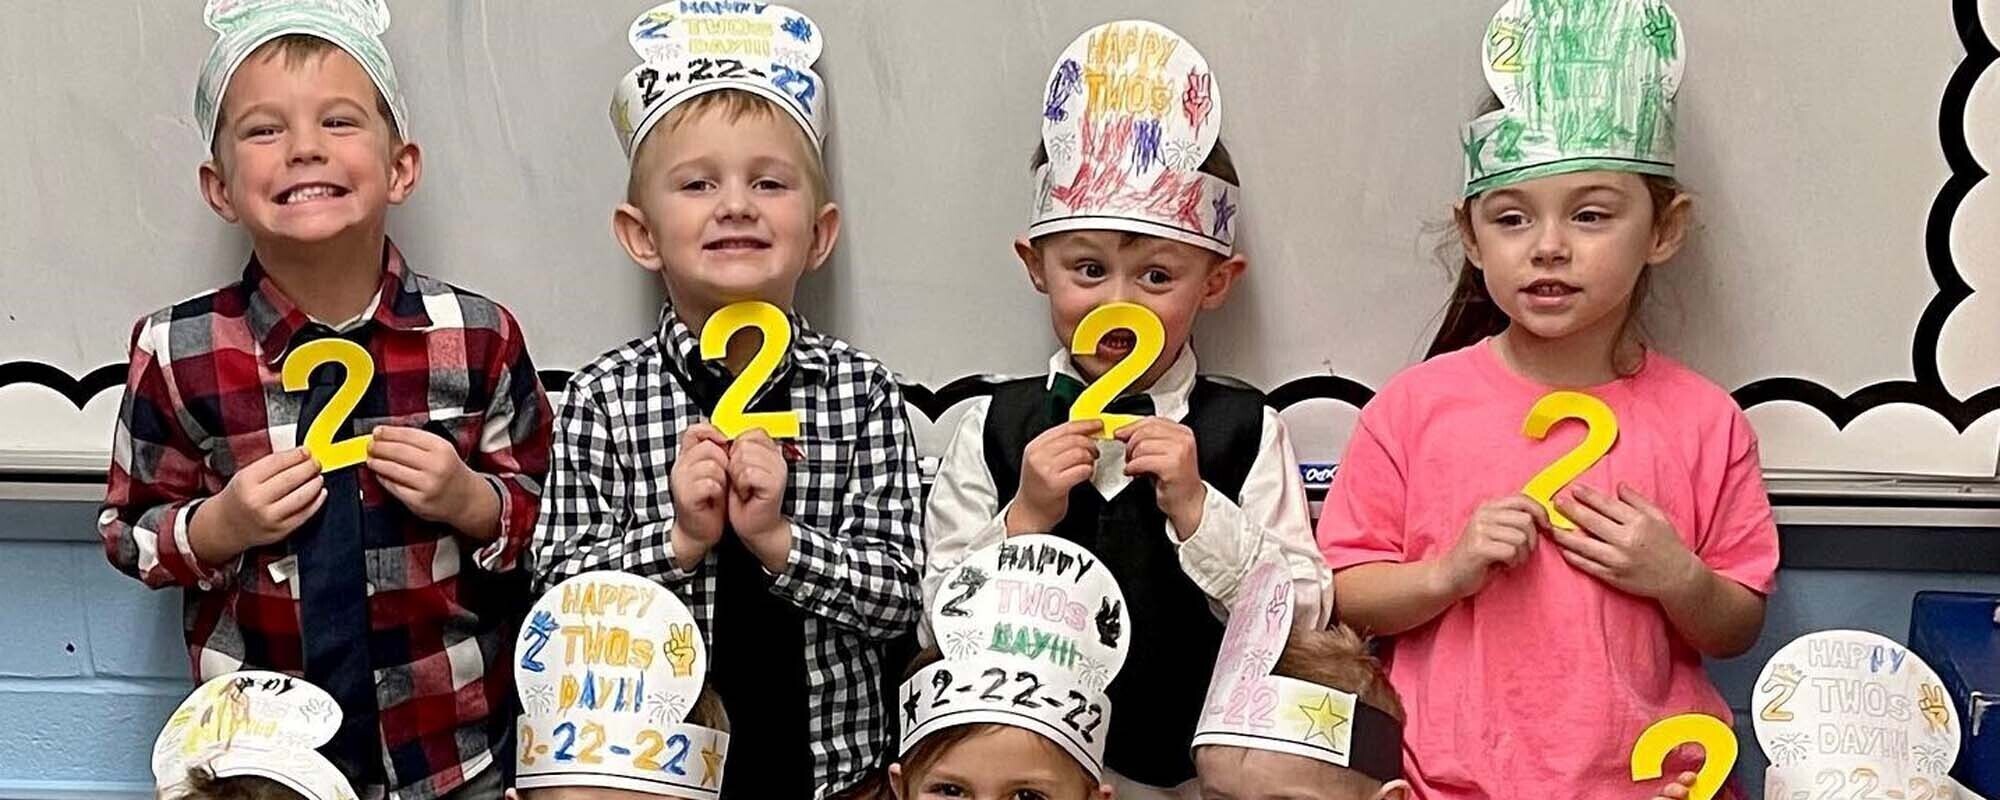 Elementary students holding the number 2